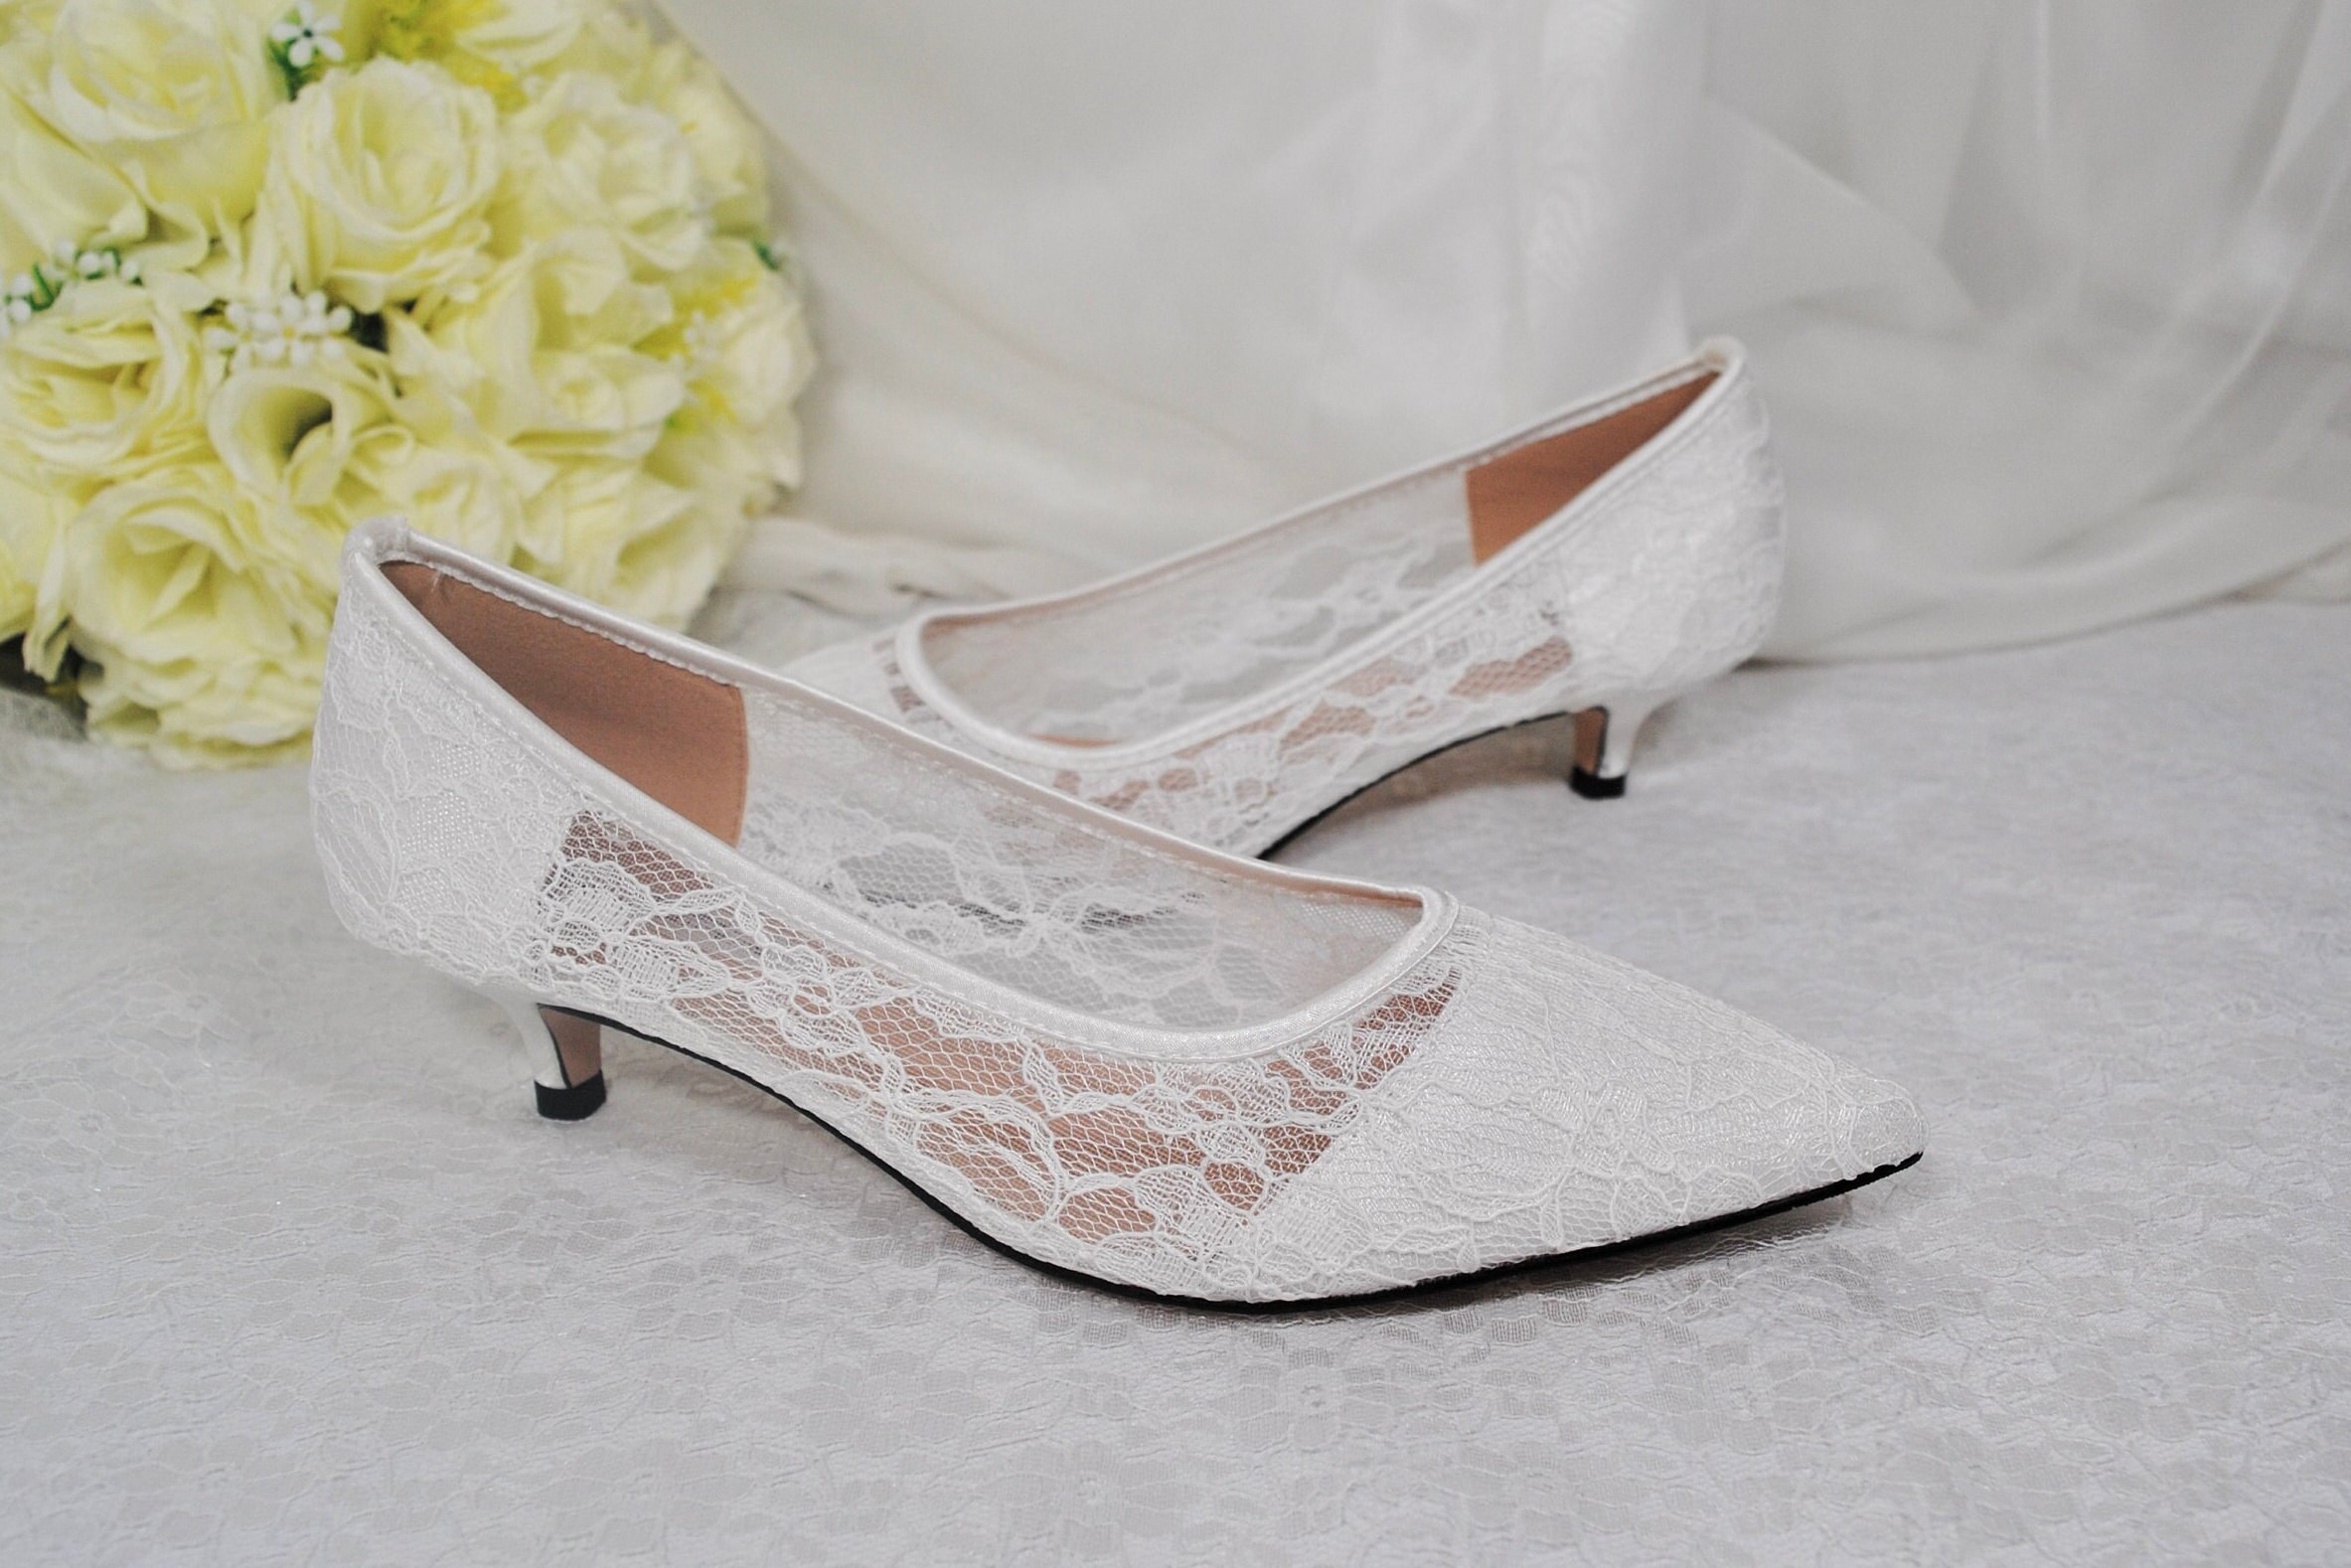 Shoes | Wedding Shoes Ivory Lace Wedding Shoes Low Heel Bridal Booties  Vintage | Poshmark